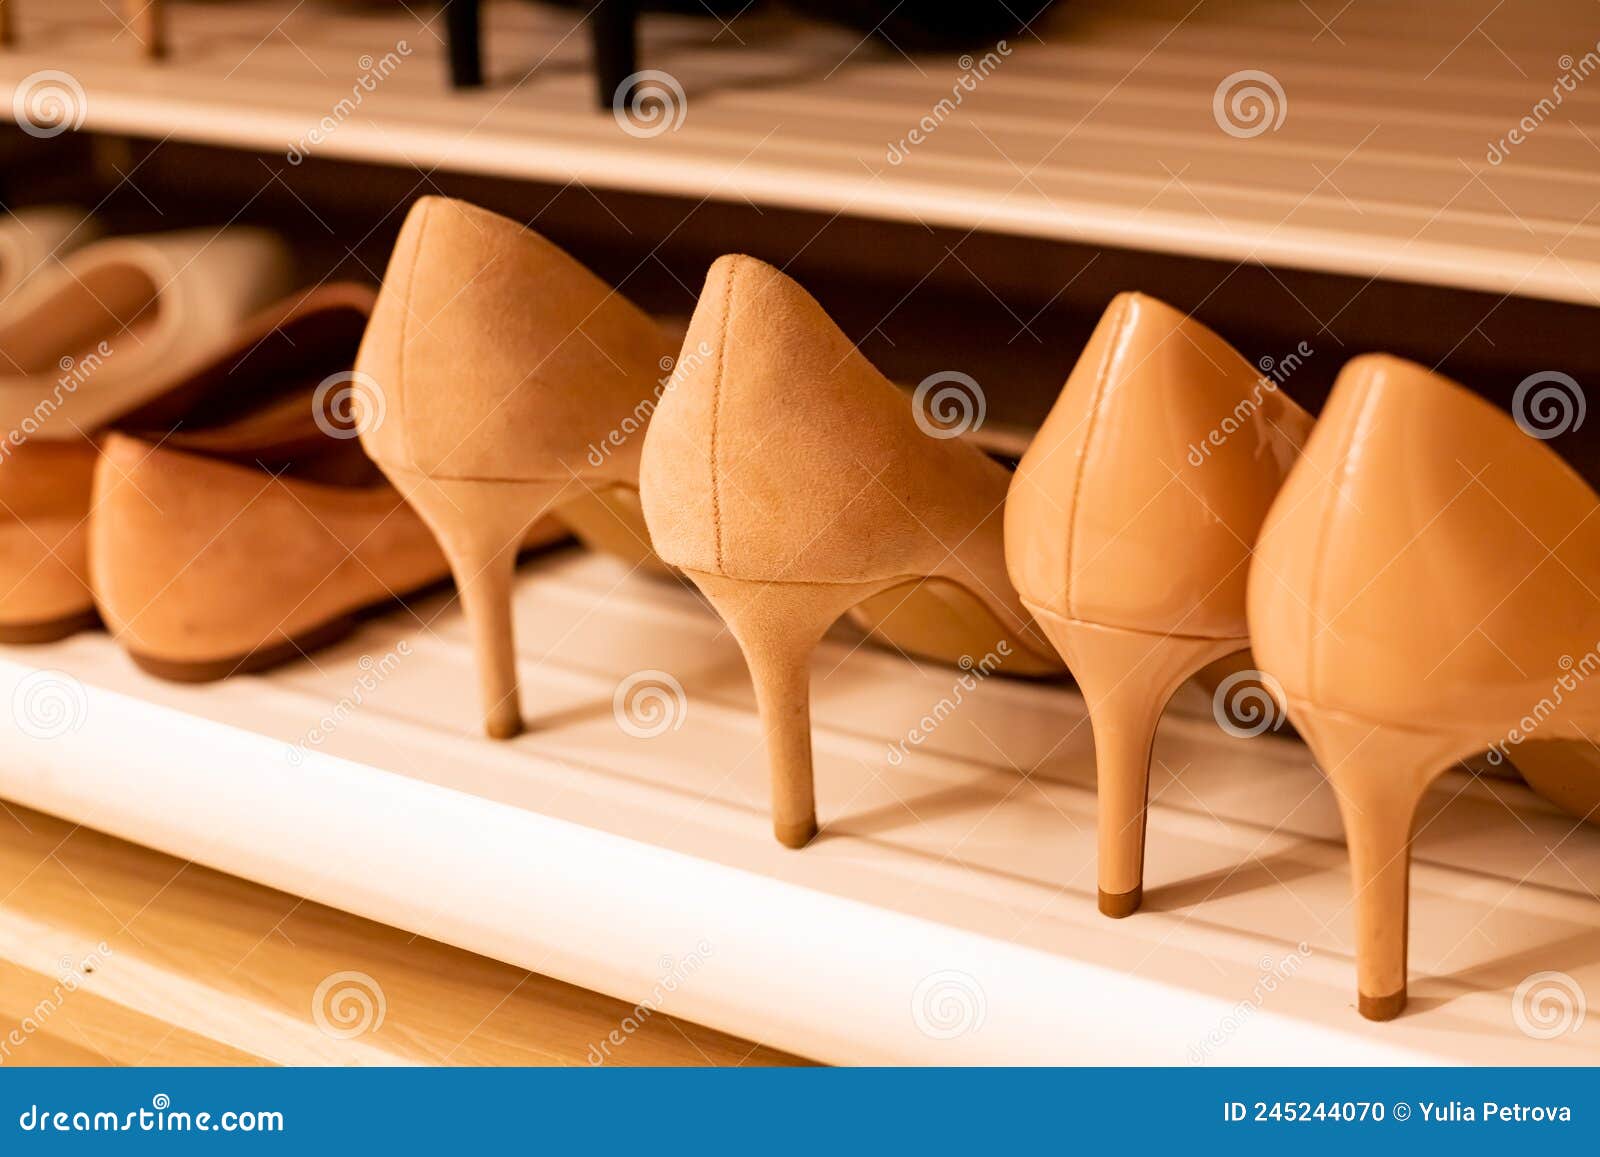 165 Man Wearing High Heels Stock Photos - Free & Royalty-Free Stock Photos  from Dreamstime